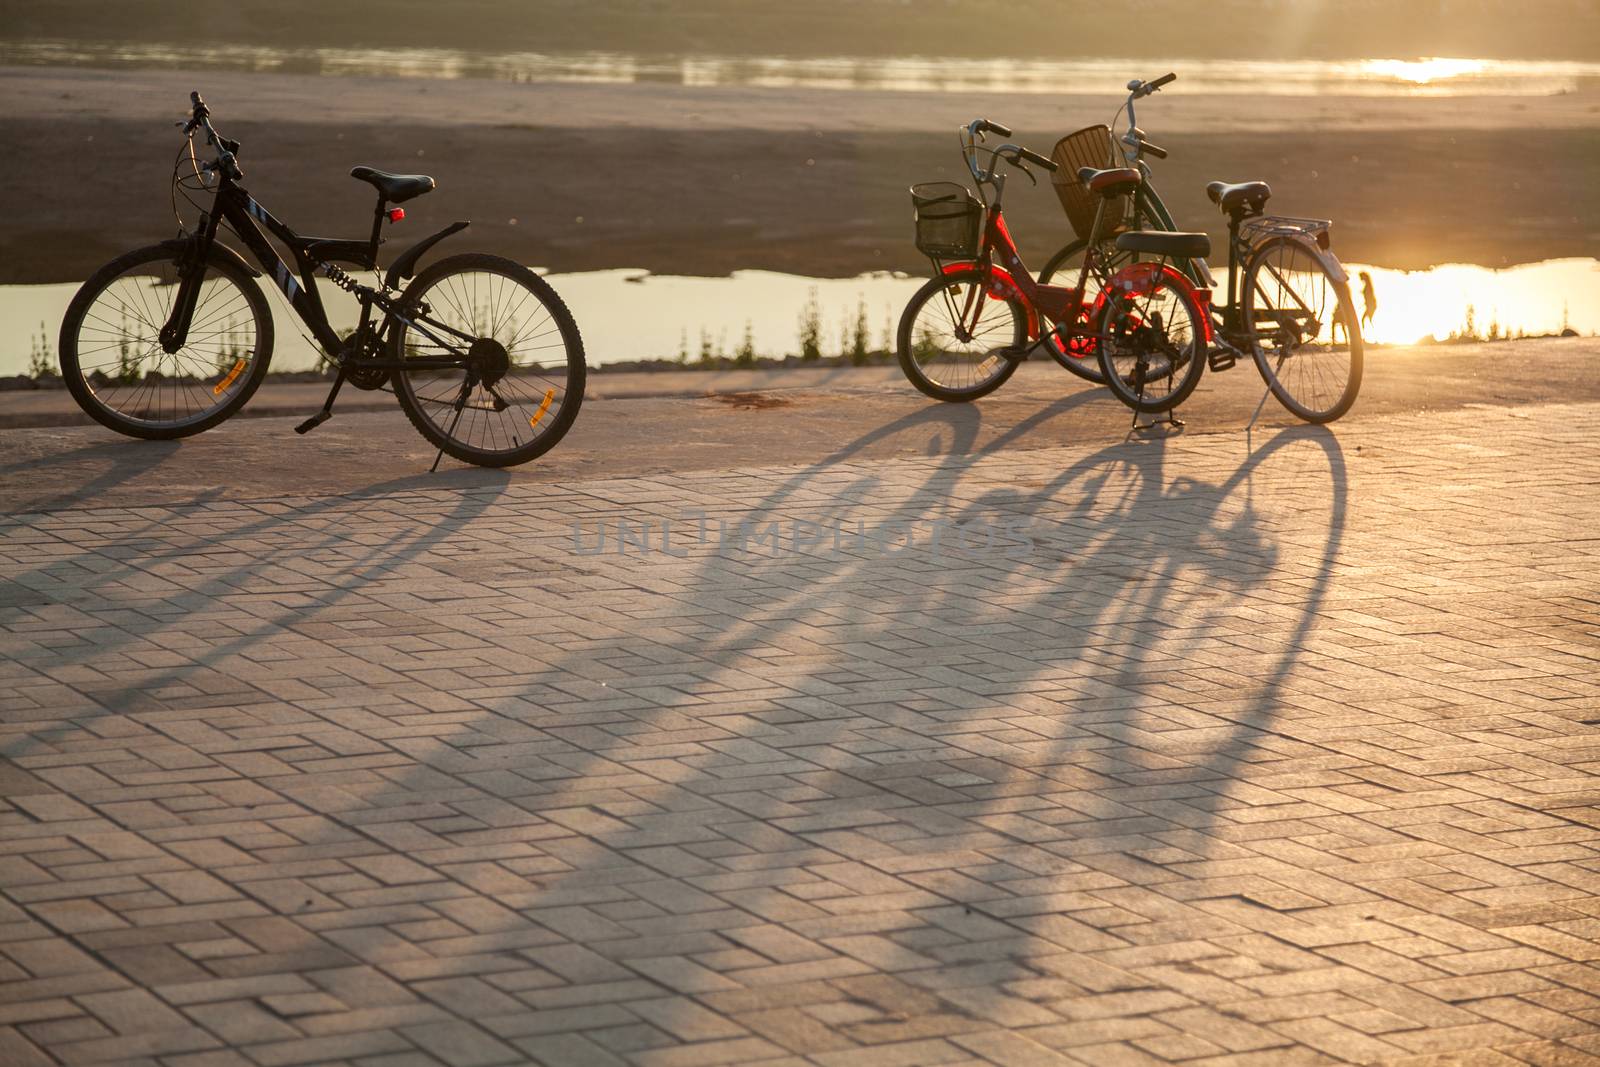 Mekong River, Vientiane, Laos at sunset, with bicycles and shadows  by kgboxford